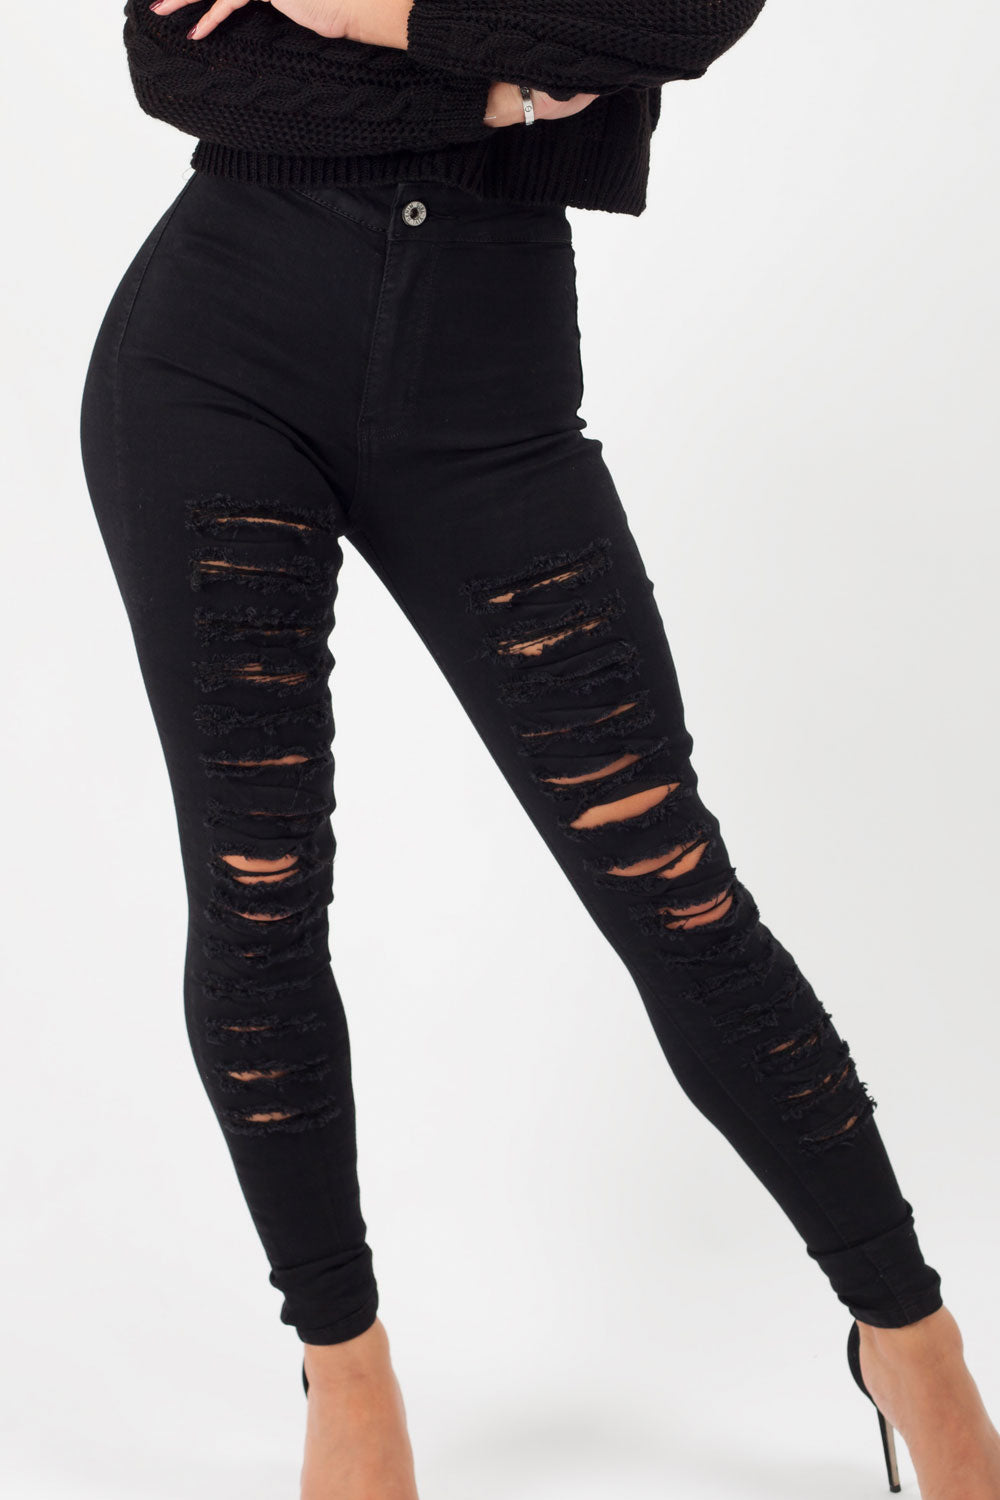 Womens Black Ripped Skinny Jeans High Waisted Styledup.co.uk